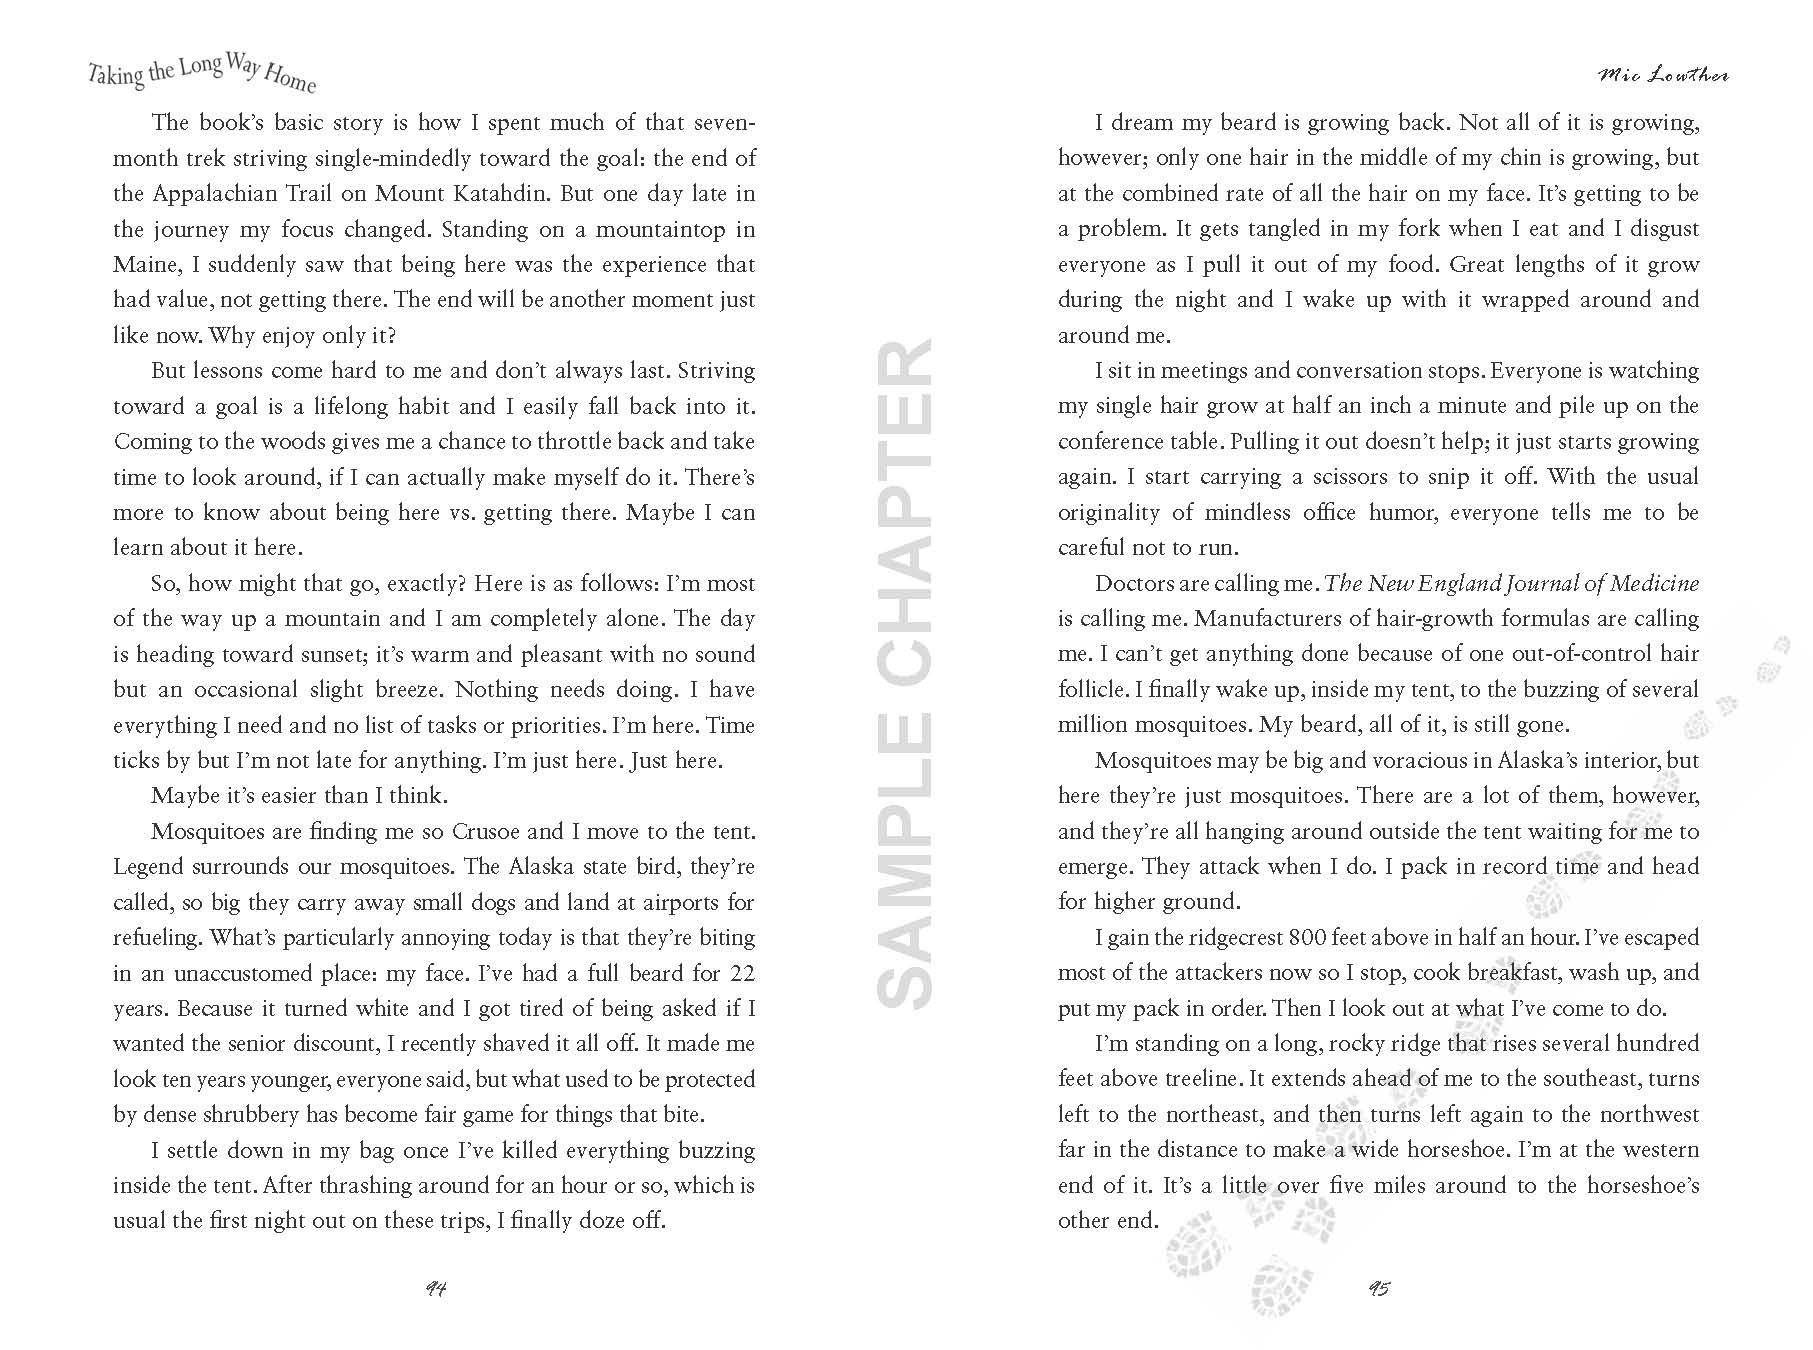 Taking The Long Way Home sample chapter pg 5 & 6